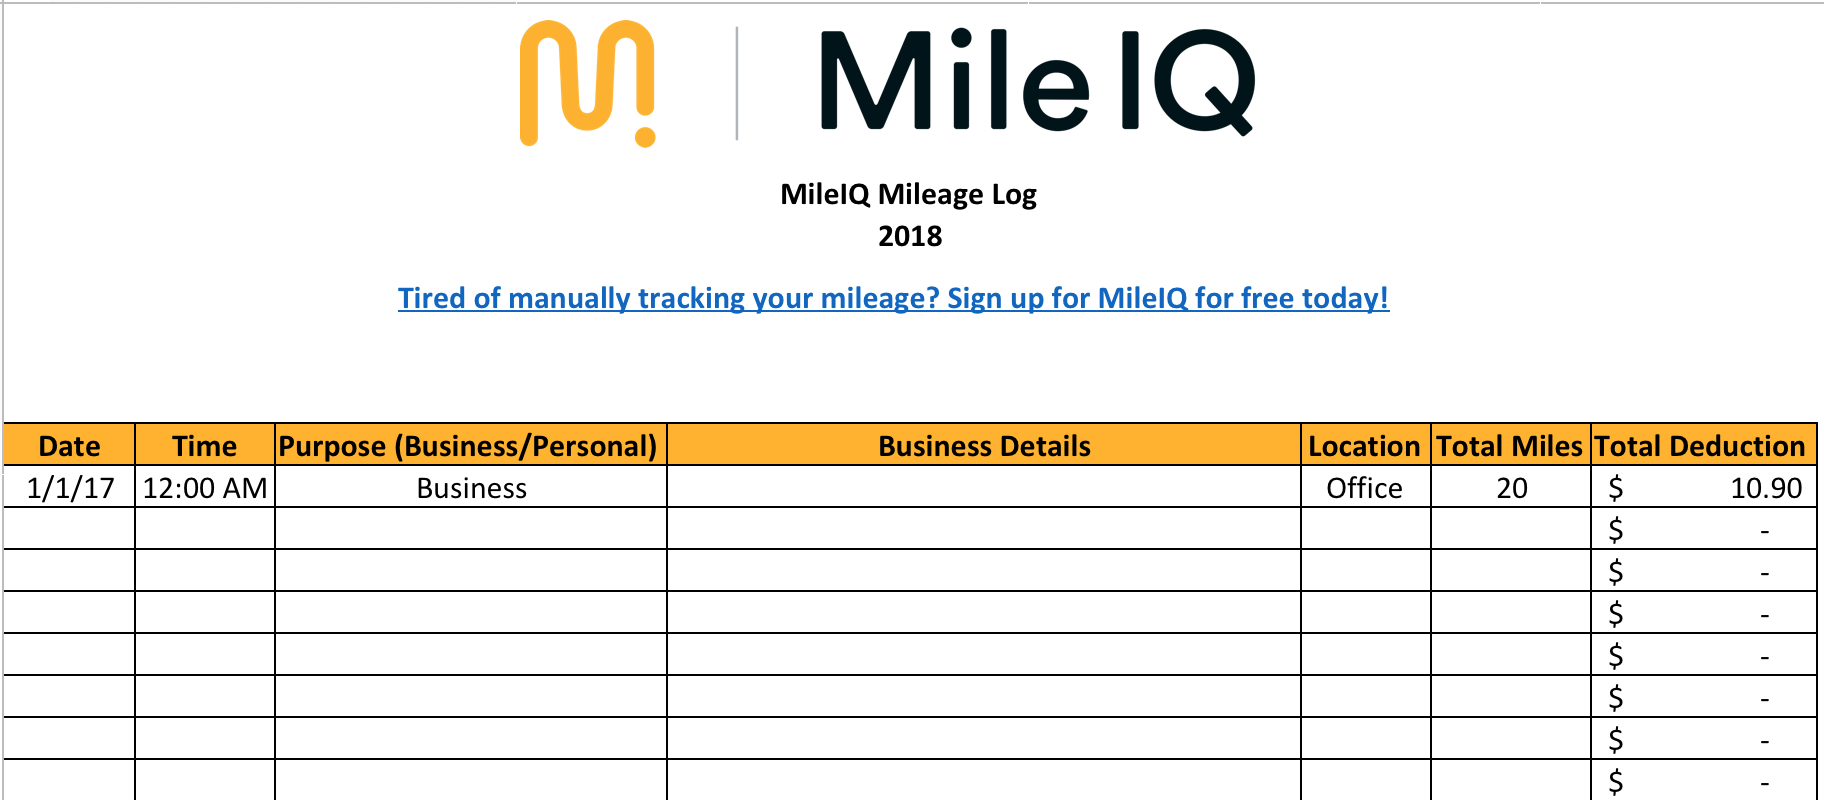 Free Mileage Log Template For Taxes, Track Business Miles | Mileiq Uk To Spreadsheet For Taxes